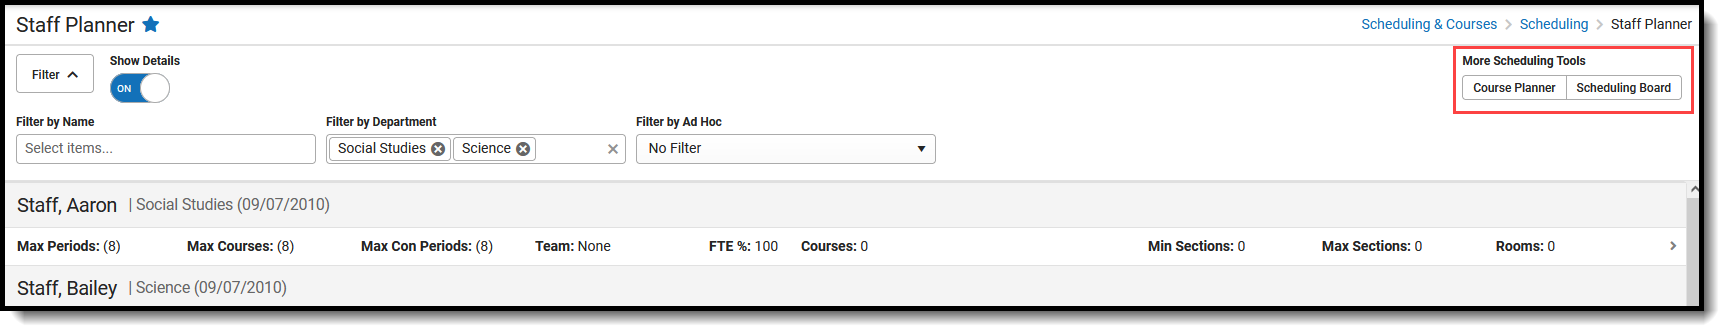 Screenshot showing how to access the Course Planner and the Scheduling Board when in the Staff Planner. 